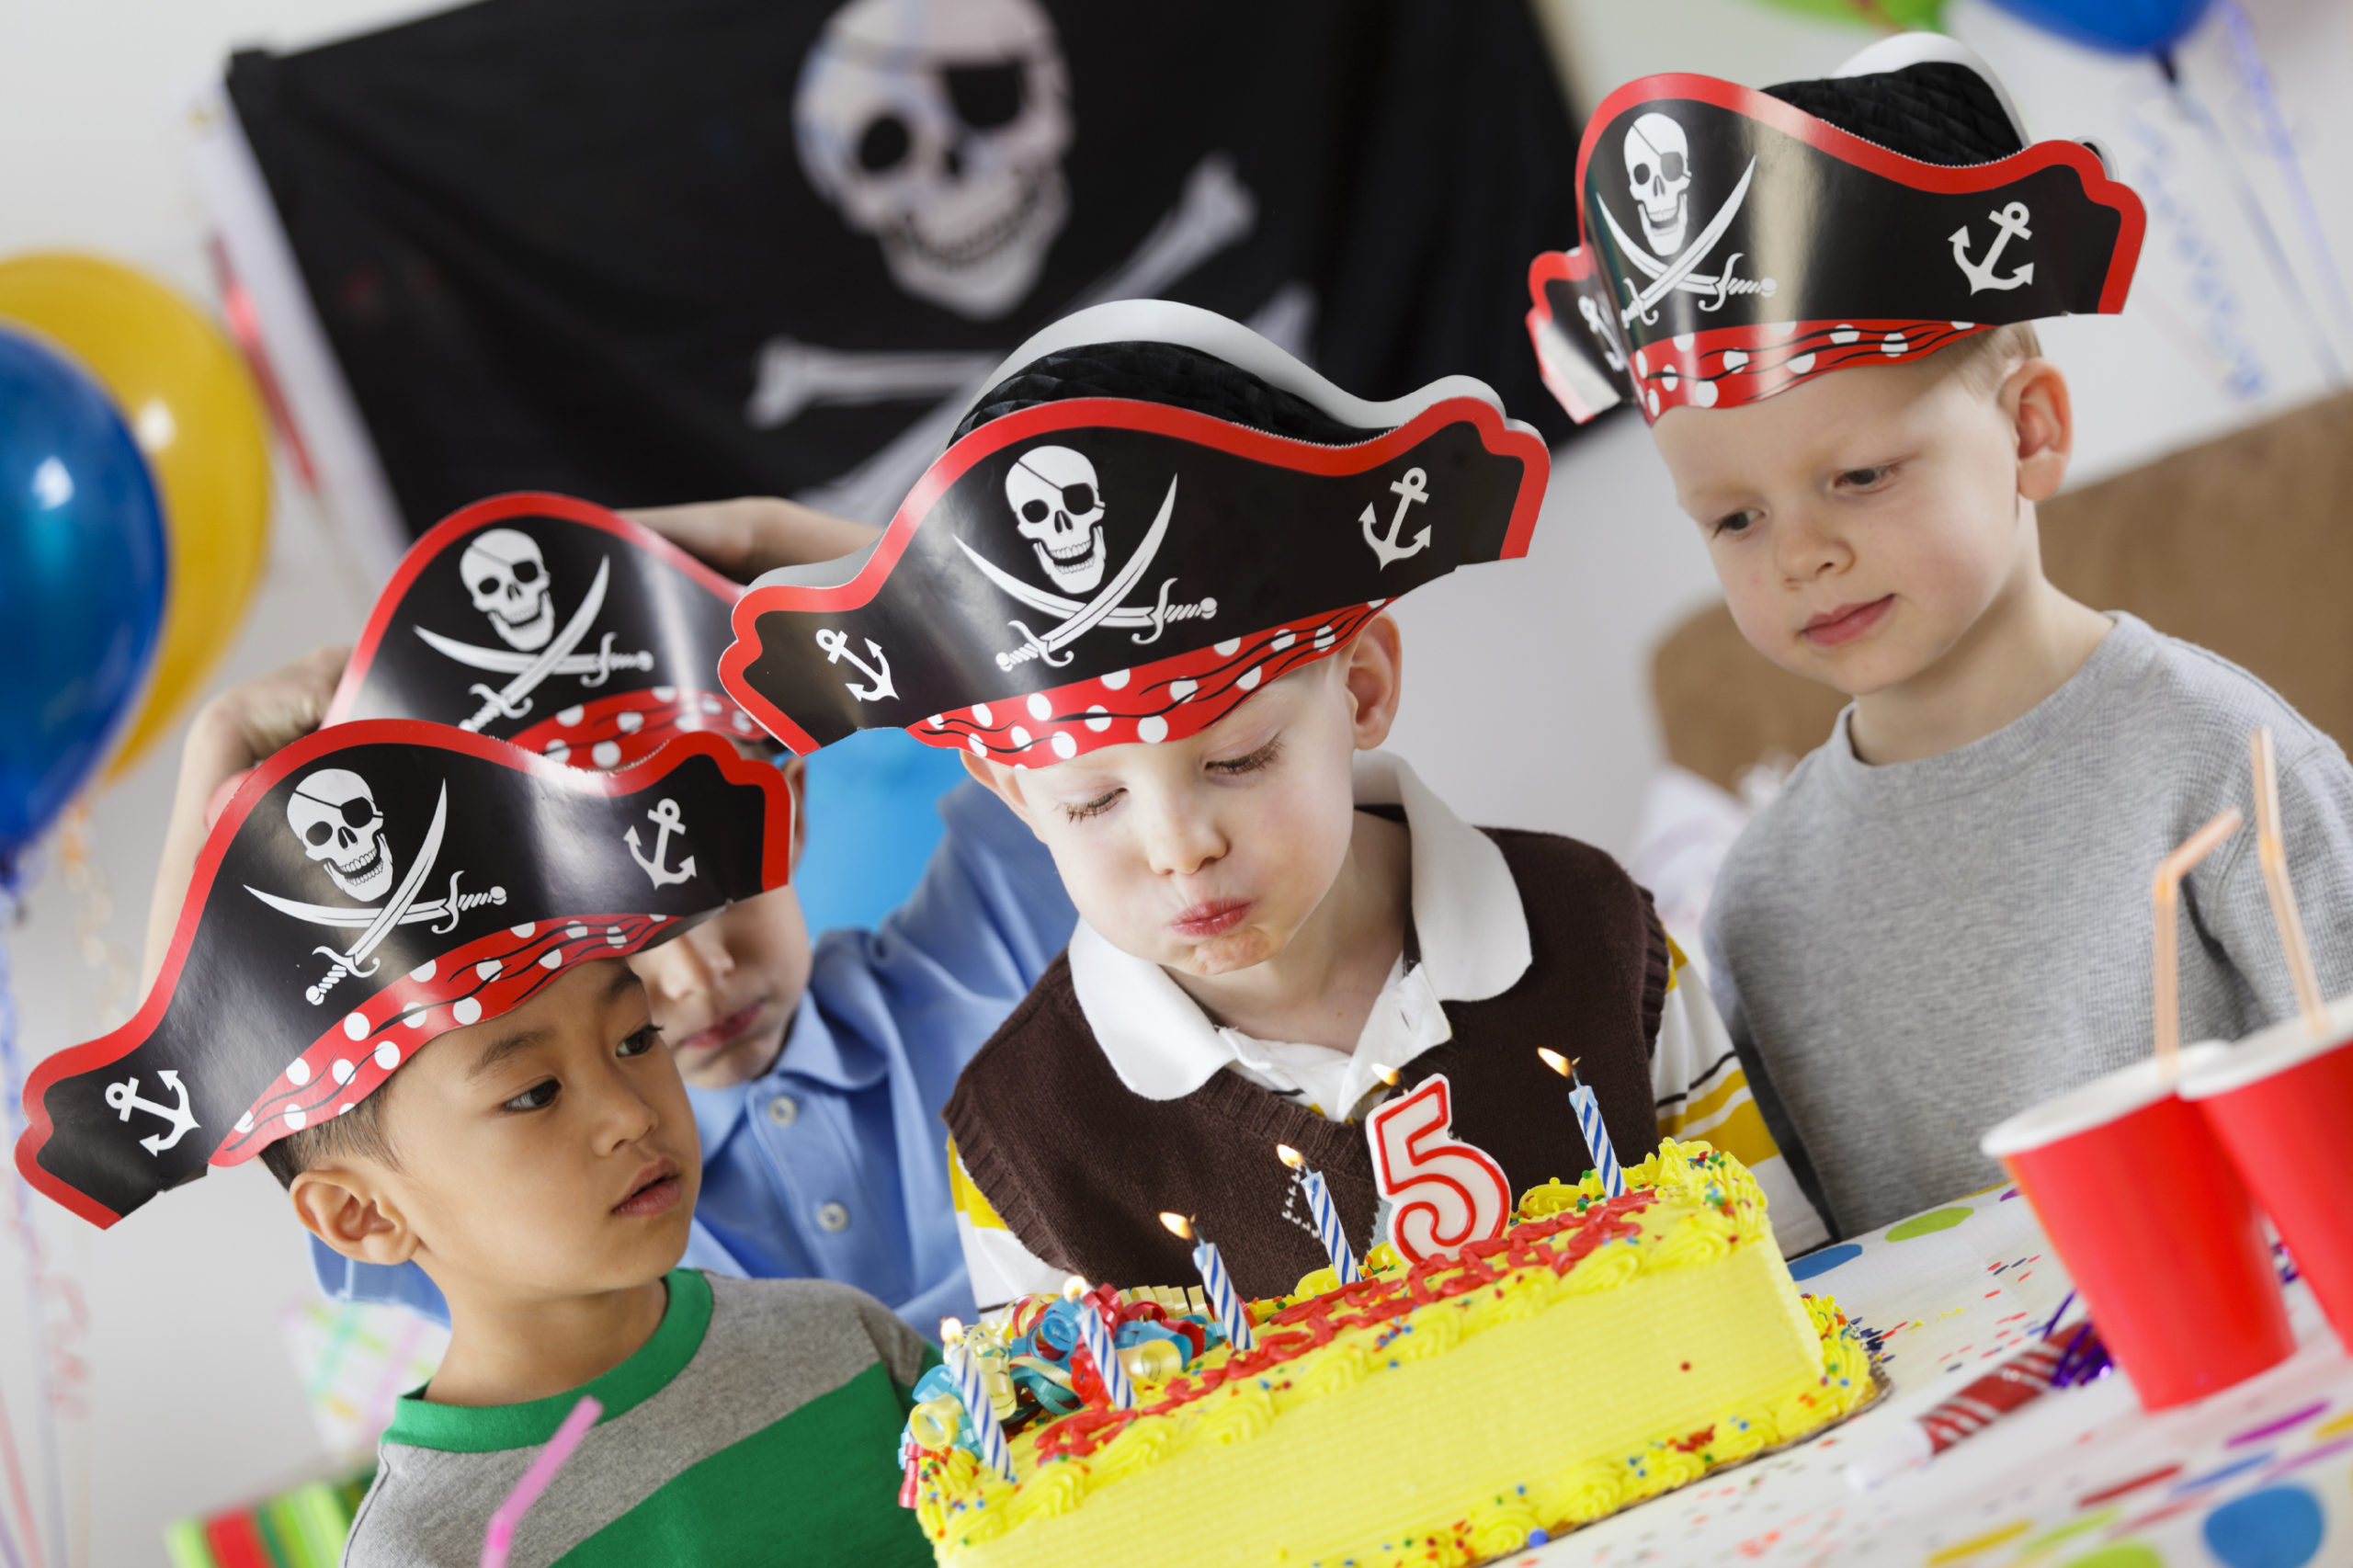 Entertainment For Kids & Pirate Parties